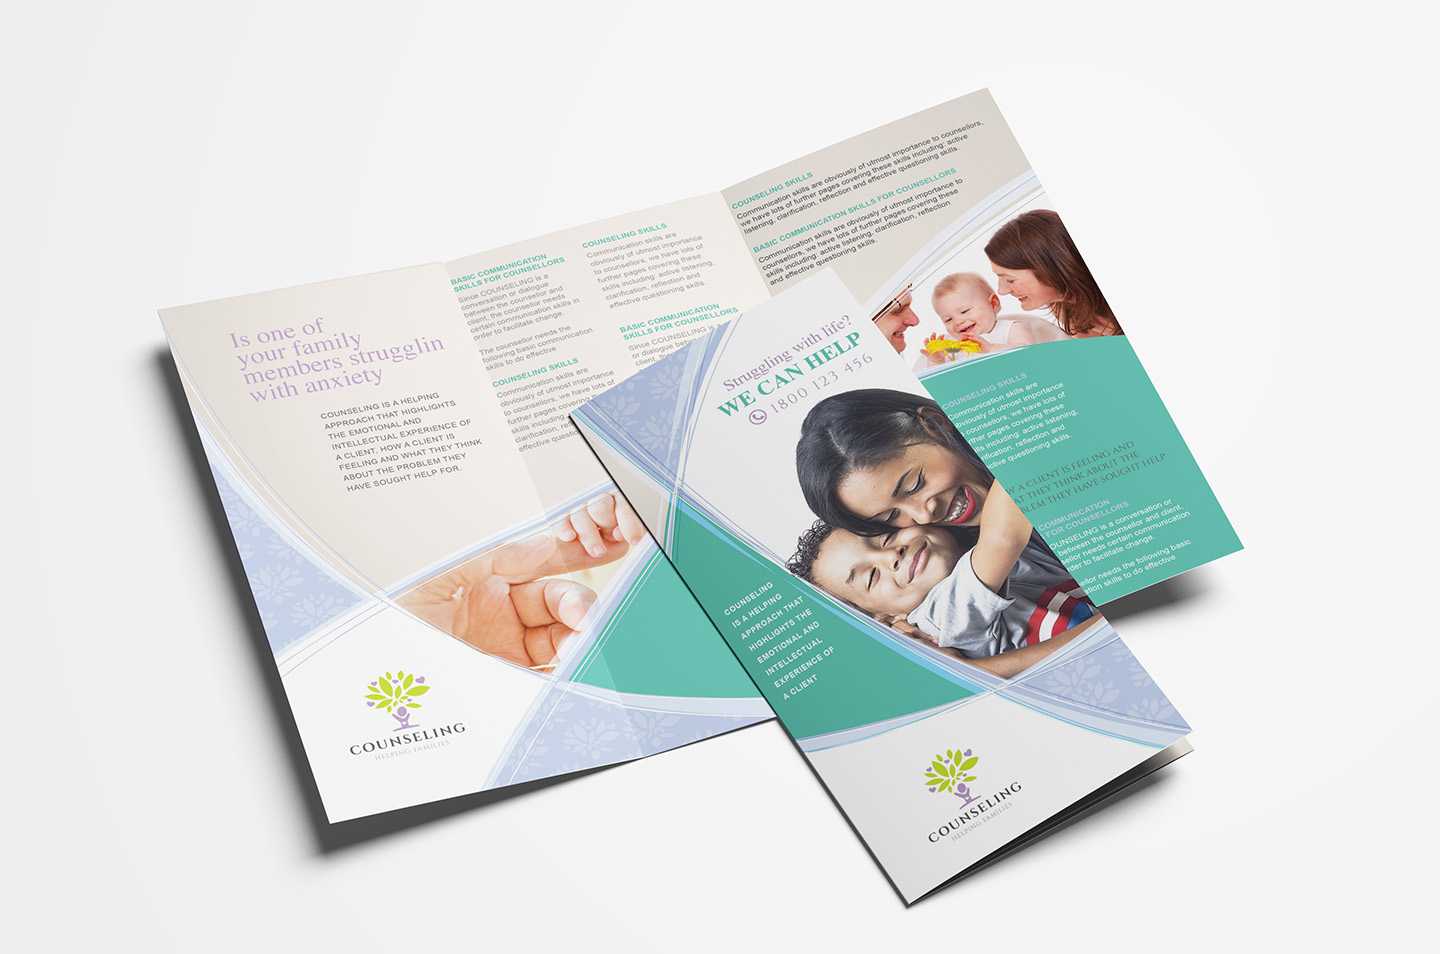 Counselling Service Tri Fold Brochure Template In Psd, Ai Inside Tri Fold Brochure Template Illustrator